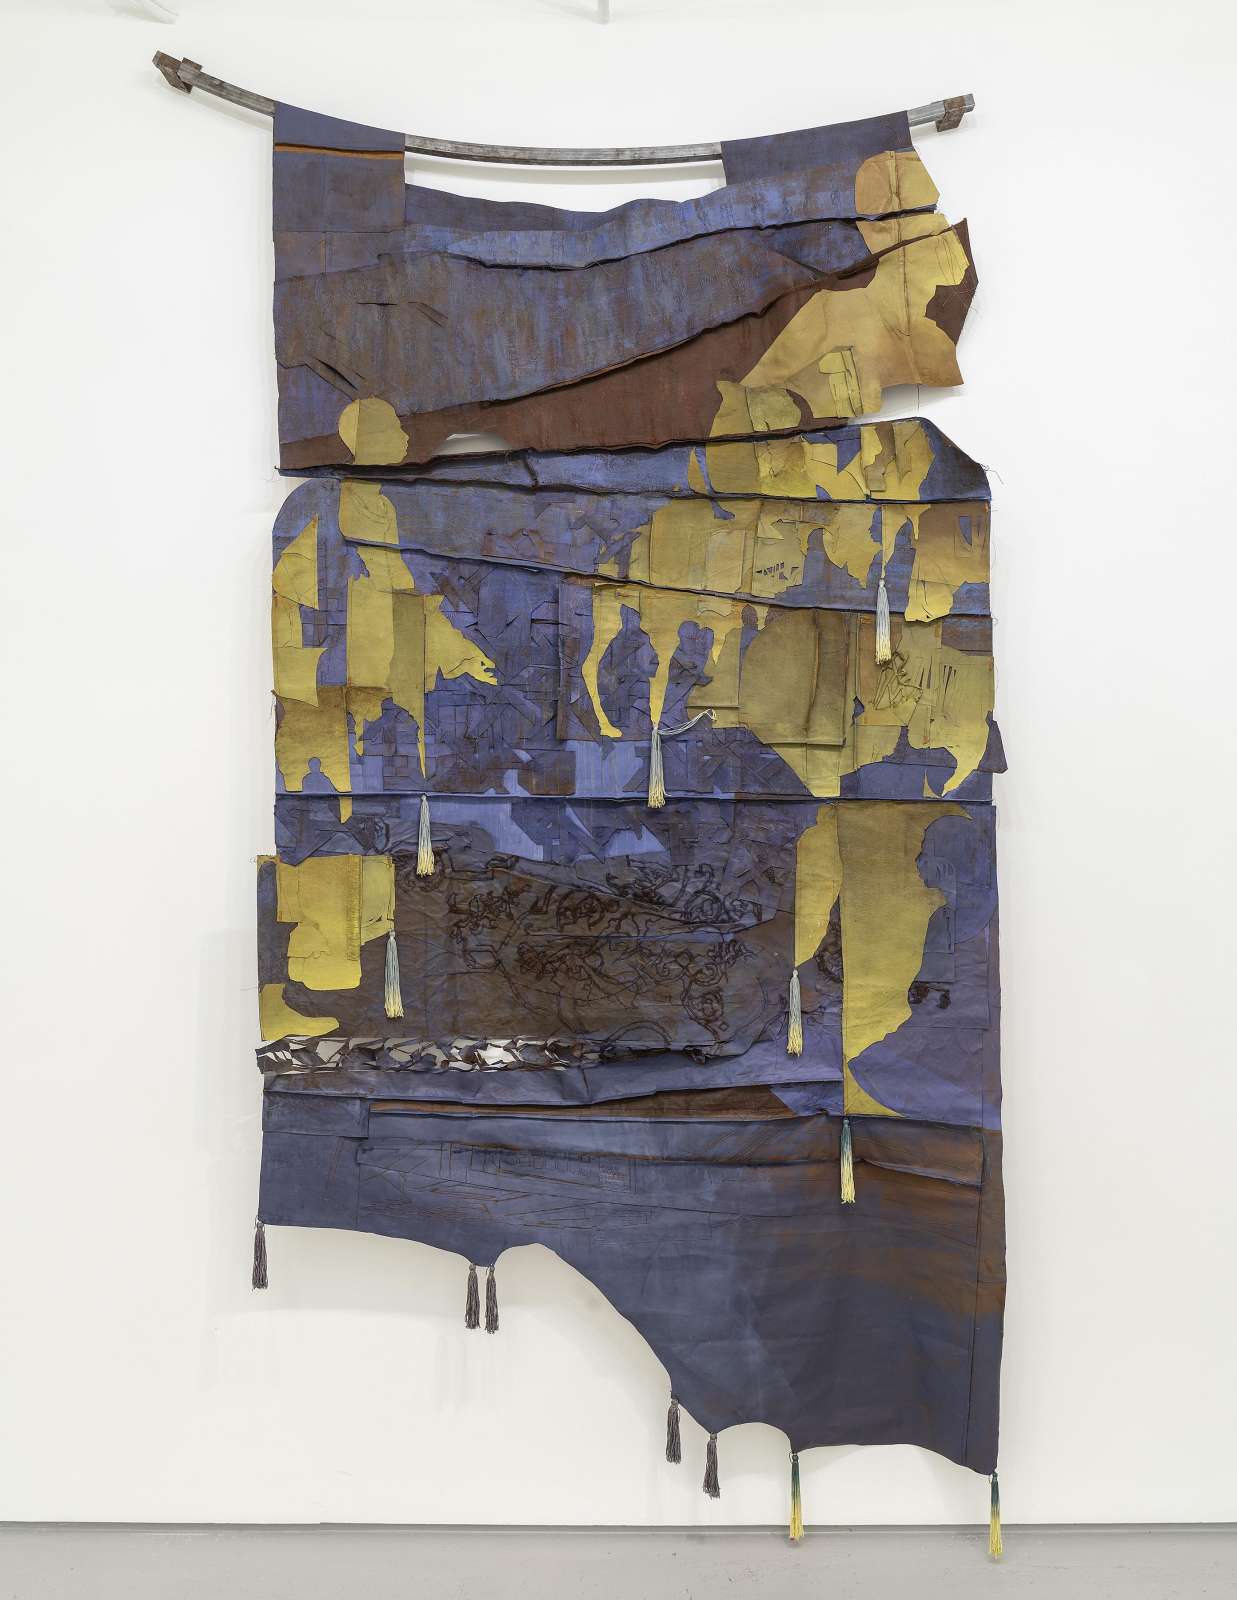 Nour Jaouda, Dust to rust, 2020. Hand-dyed cotton, Copper